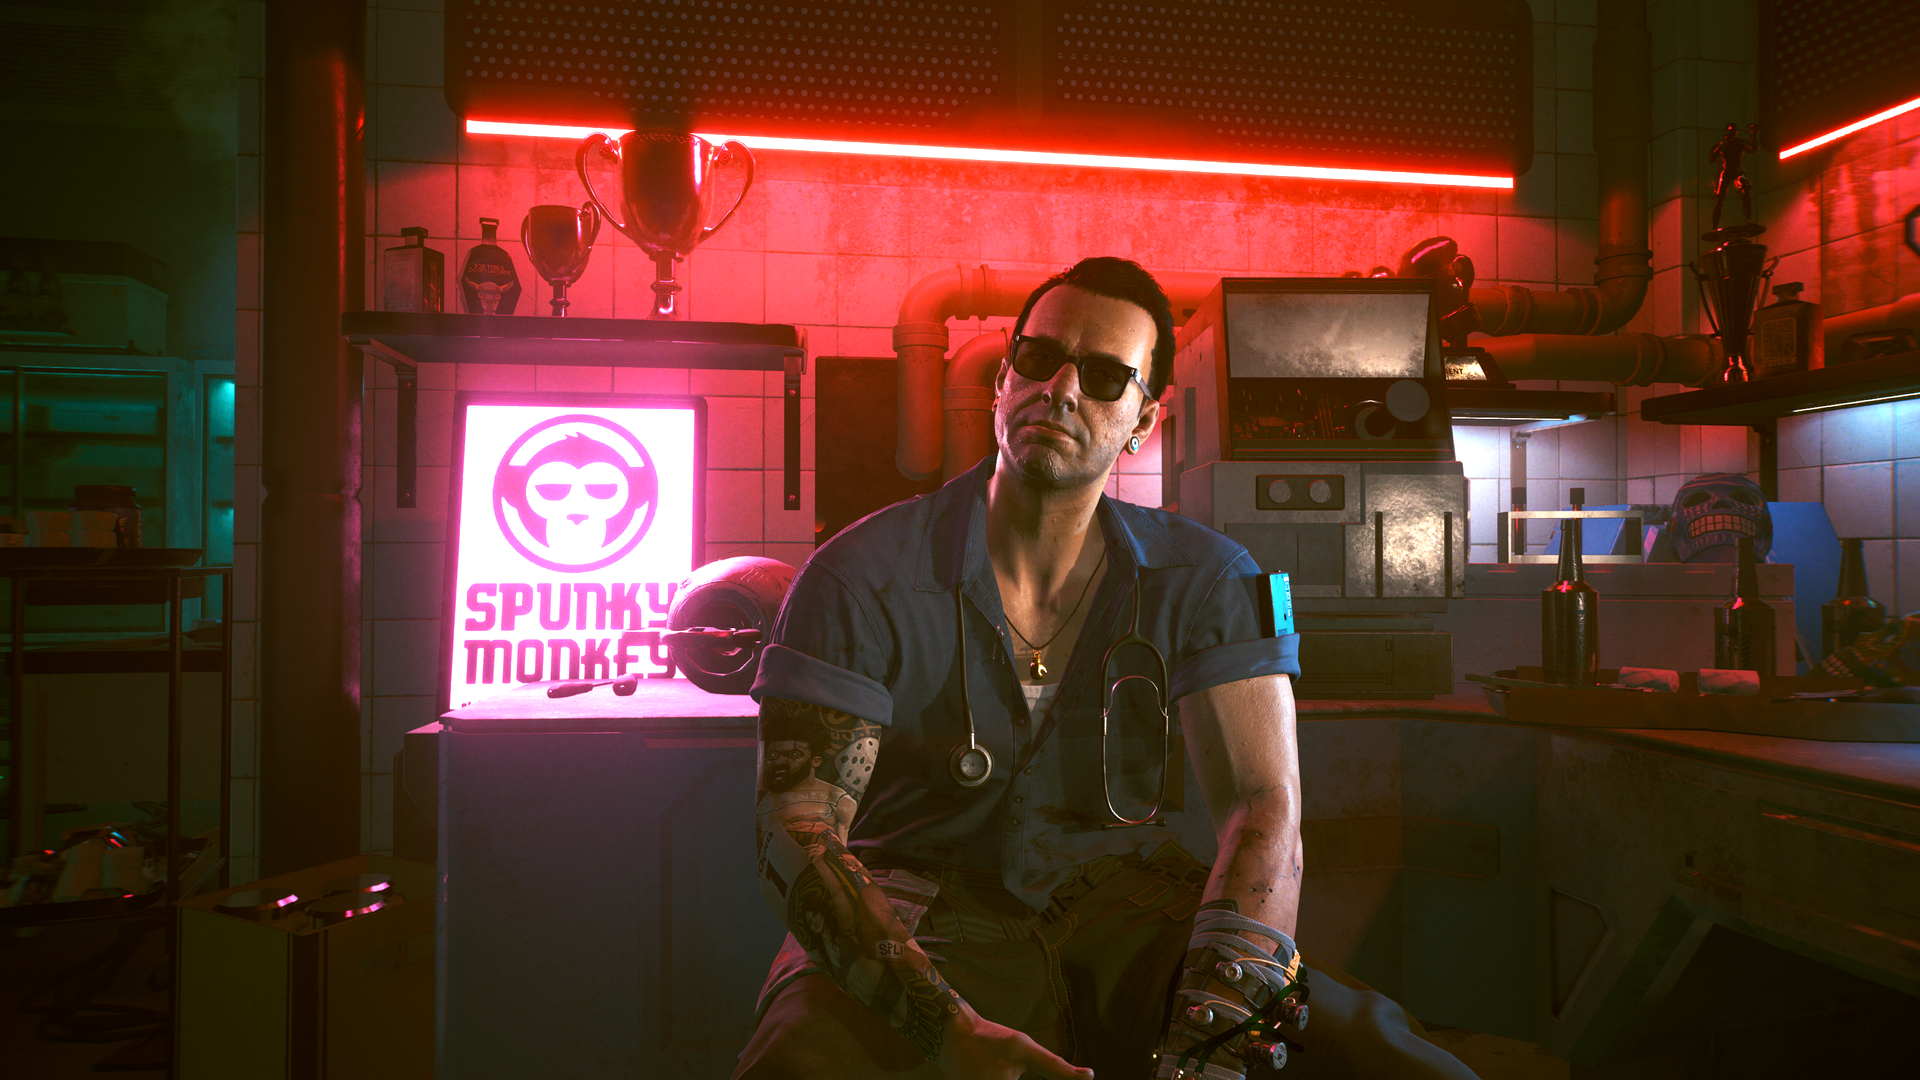 Video game screenshot of a man wearing sunglasses, sitting in a room glowing with a red light